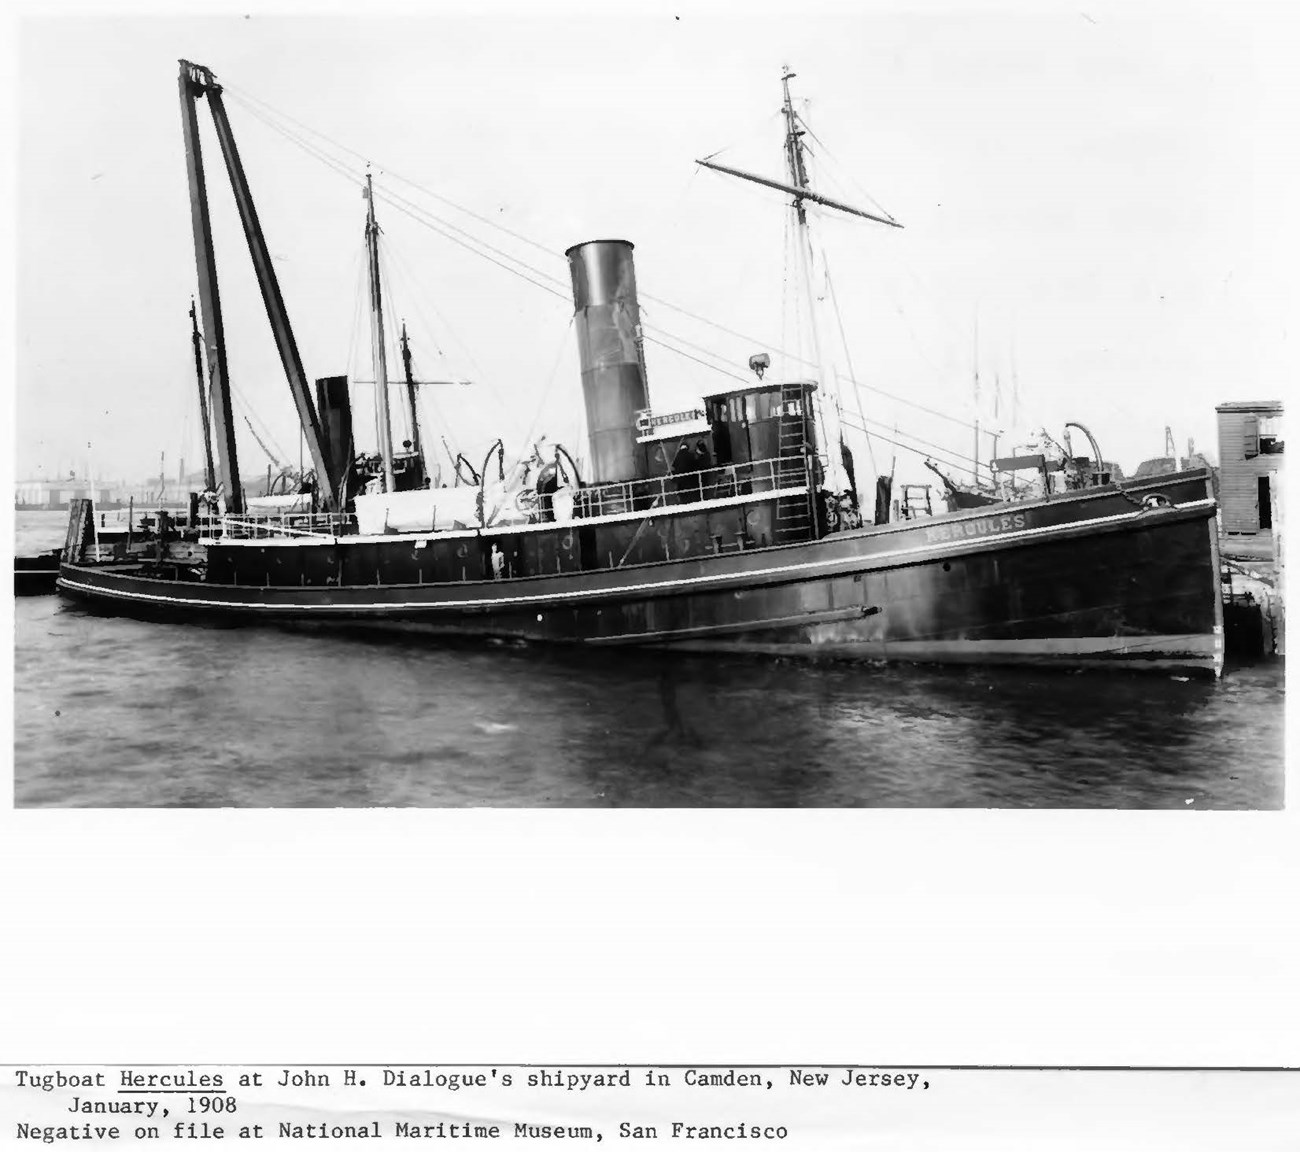 Black and white photo of port side of team tug Hercules at John H. Dialogue's shipyard in Camden, New Jersey, January 1908